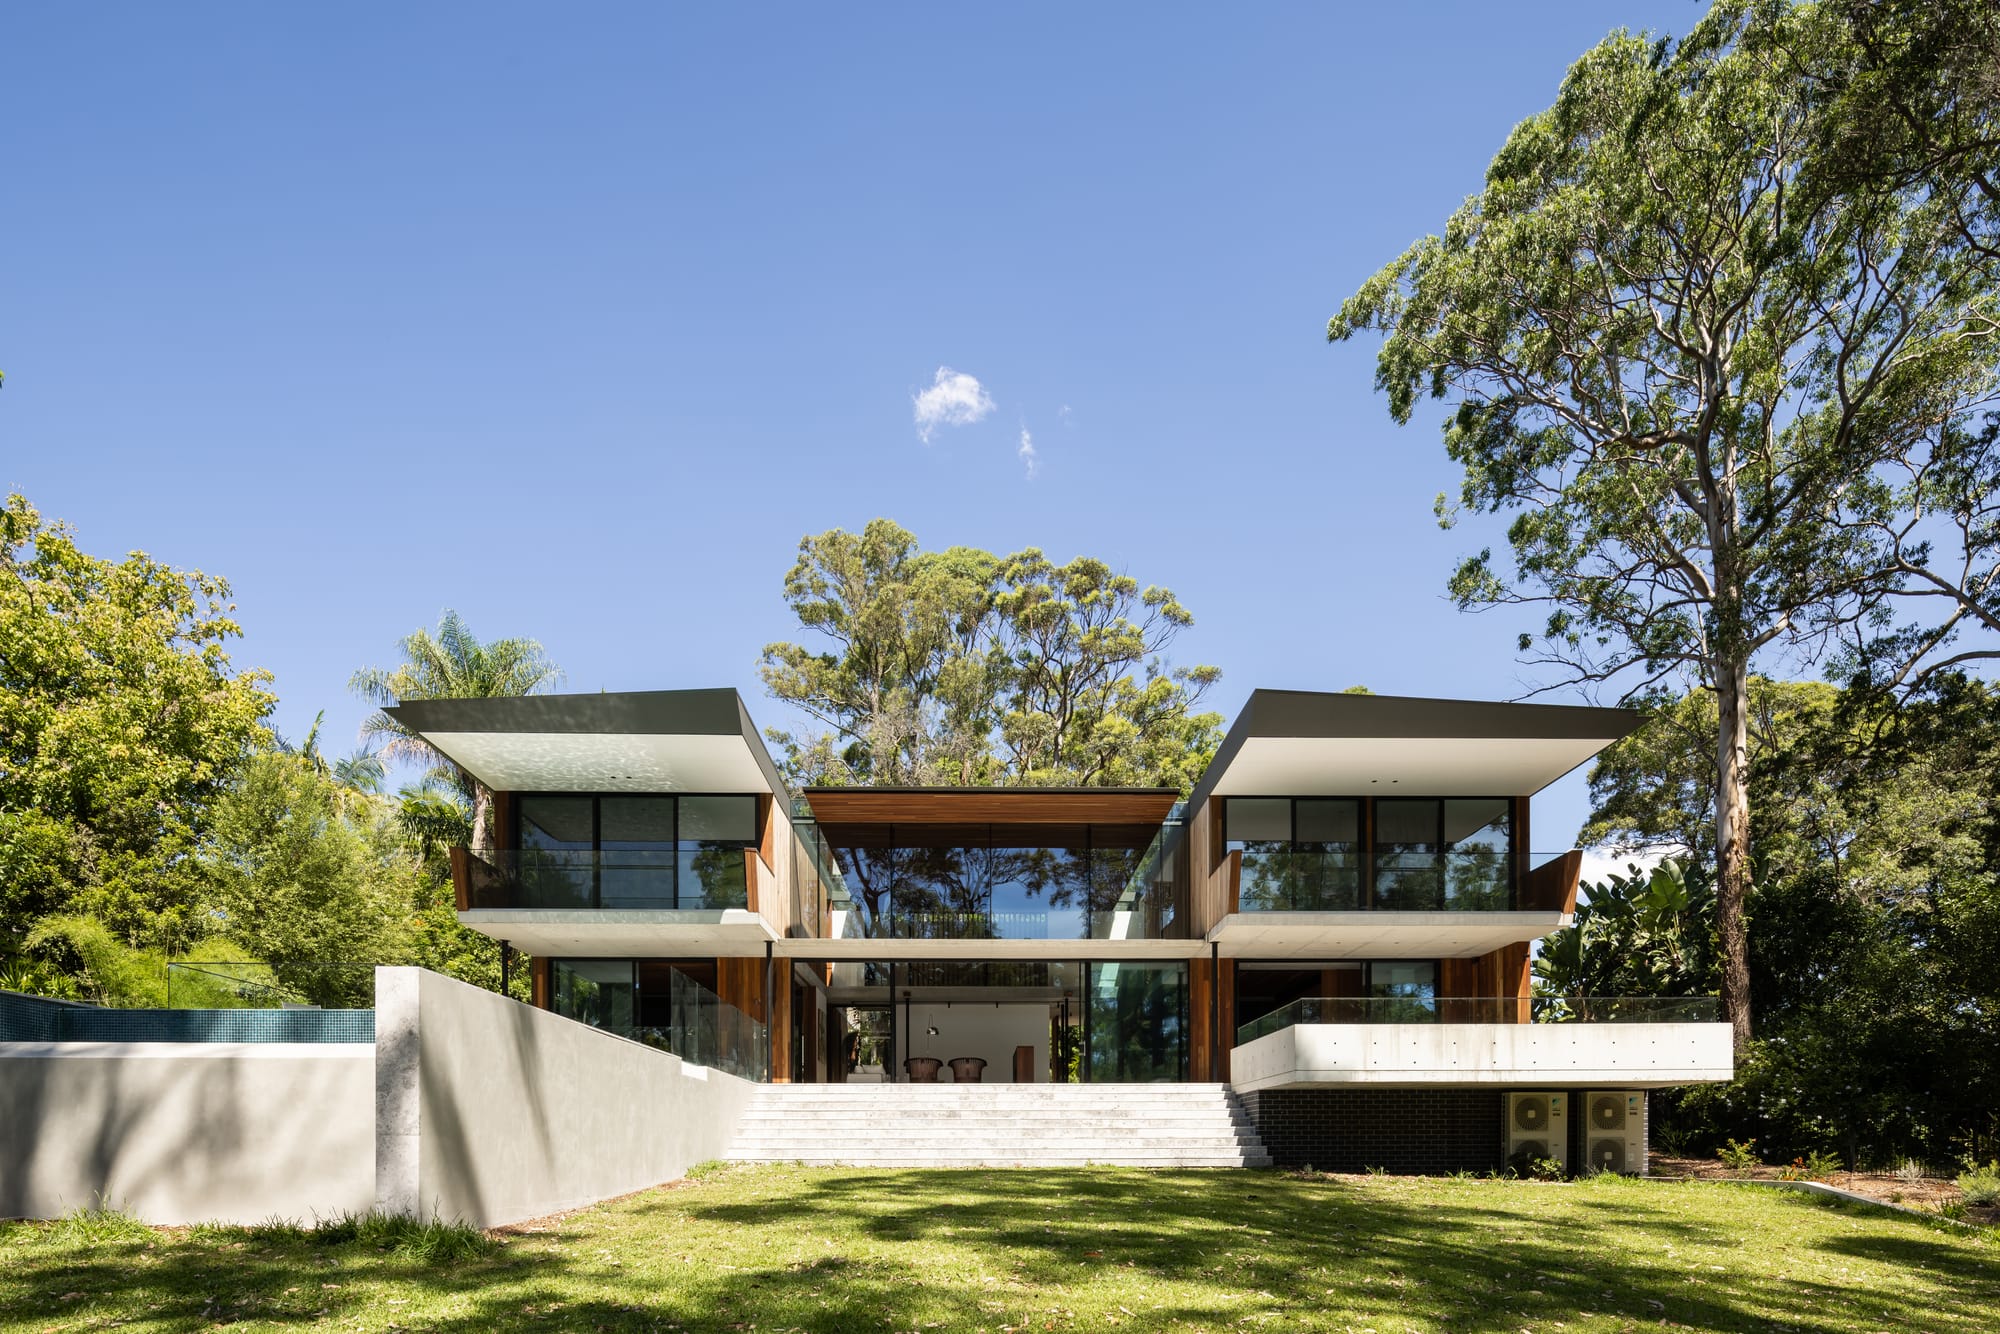 Mortlock Timbers Series: Fox Valley House. Photography by Simon Whitbread. Rear facade of double storey residential home with two sings and infinity pool to the left. Grassy backyard. 